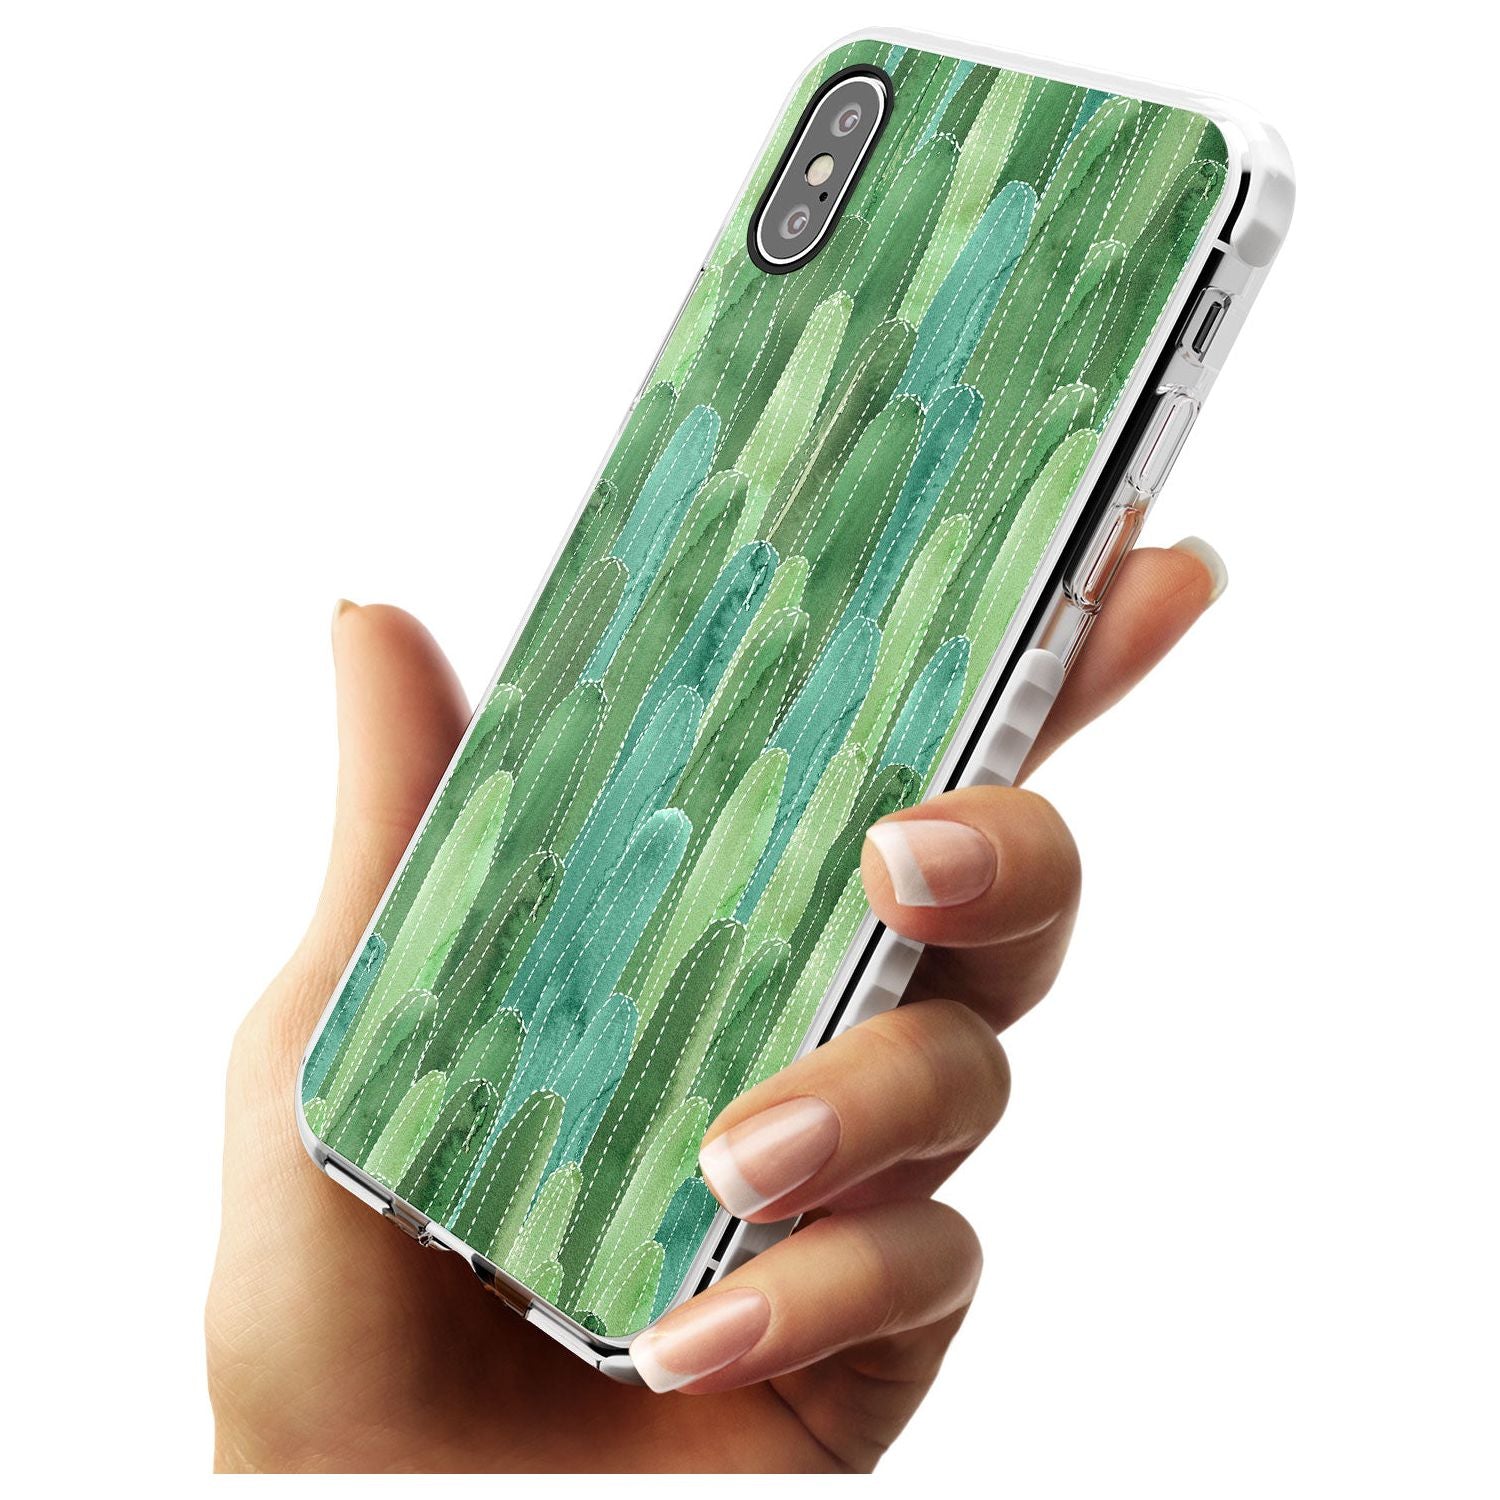 Skinny Cacti Pattern Design Impact Phone Case for iPhone X XS Max XR